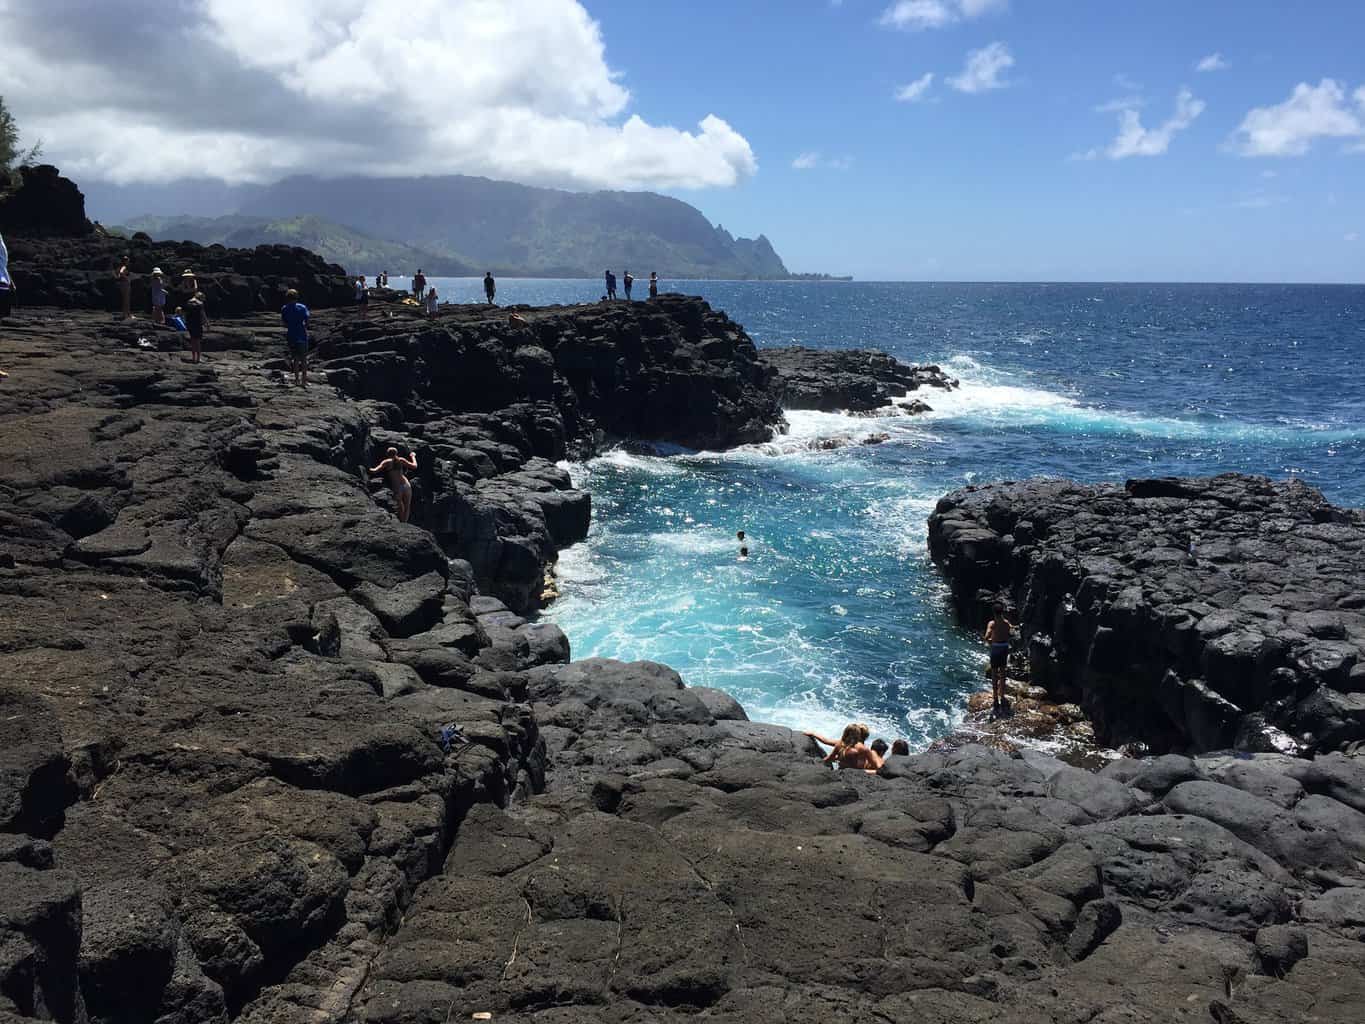 Kauai Firefighters Airlift Injured Man From Queen’s Bath